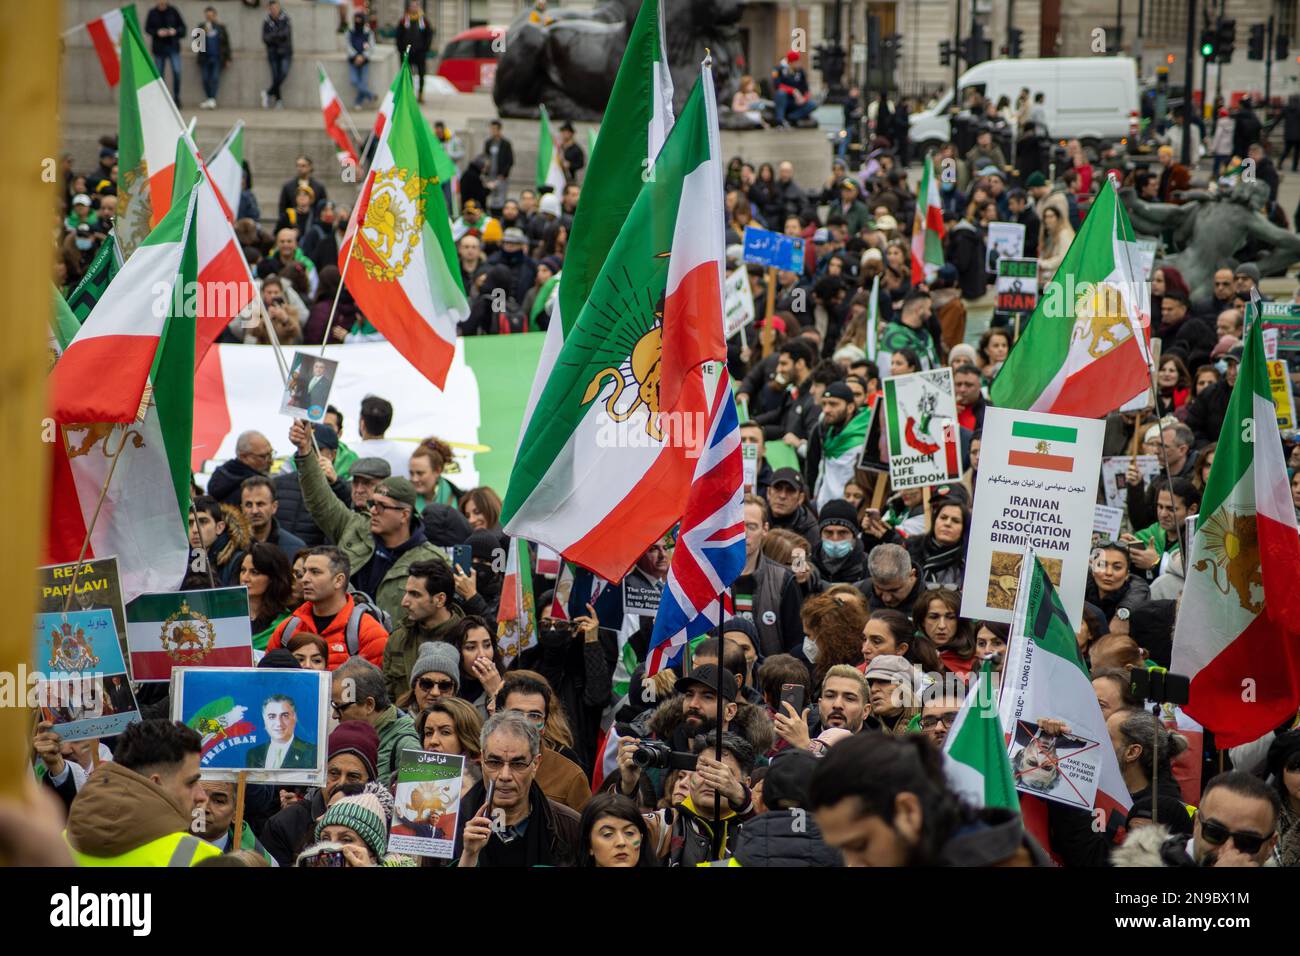 London, UK - 11 Feb 2023: As today marks the 44th anniversary of the Islamic Revolution in Iran. After more than five months of continuous protest in support of the woman, life, freedom movement, Thousands of protesters gathered in Trafalgar Sq. to denounce the Regime in Iran.  Protesters were mainly holding pictures of Mahsa Amini, and the Iranian Royal Family (Pahlavi) as well as the Shir-o-Khorshid (Lion and Sun) flag of Iran—the flag, or its emblem, were part of Iranian national identity for centuries—which was changed after the Islamic Revolution in 1979.   Credit: Sinai Noor/Alamy Live N Stock Photo